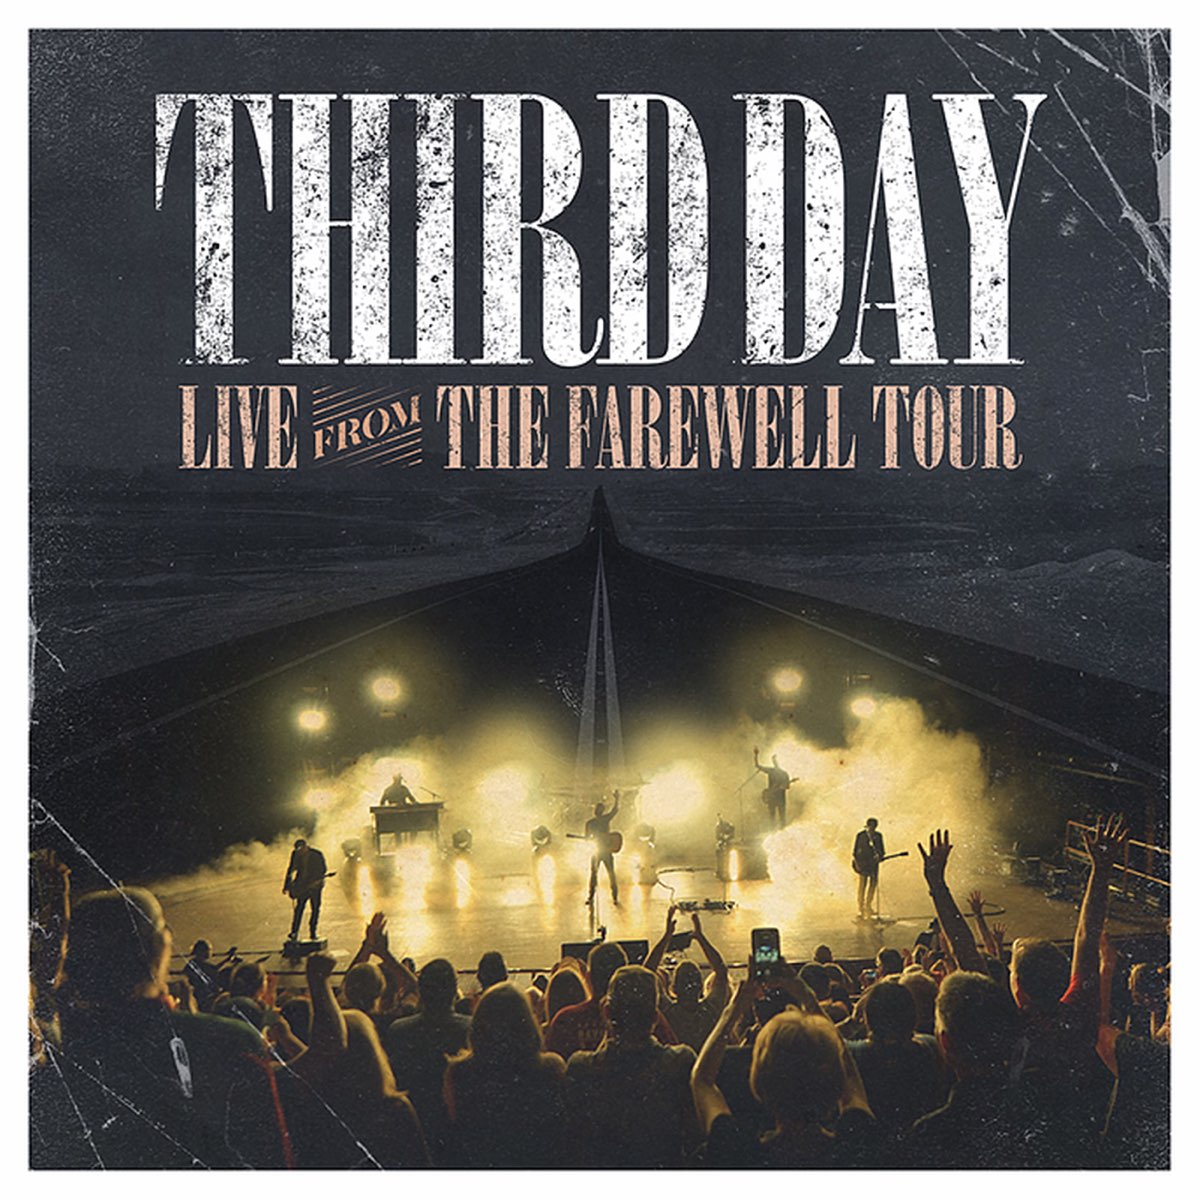 PHYSICAL CD - Third Day - Live From The Farewell Tour - 2 Disc Set